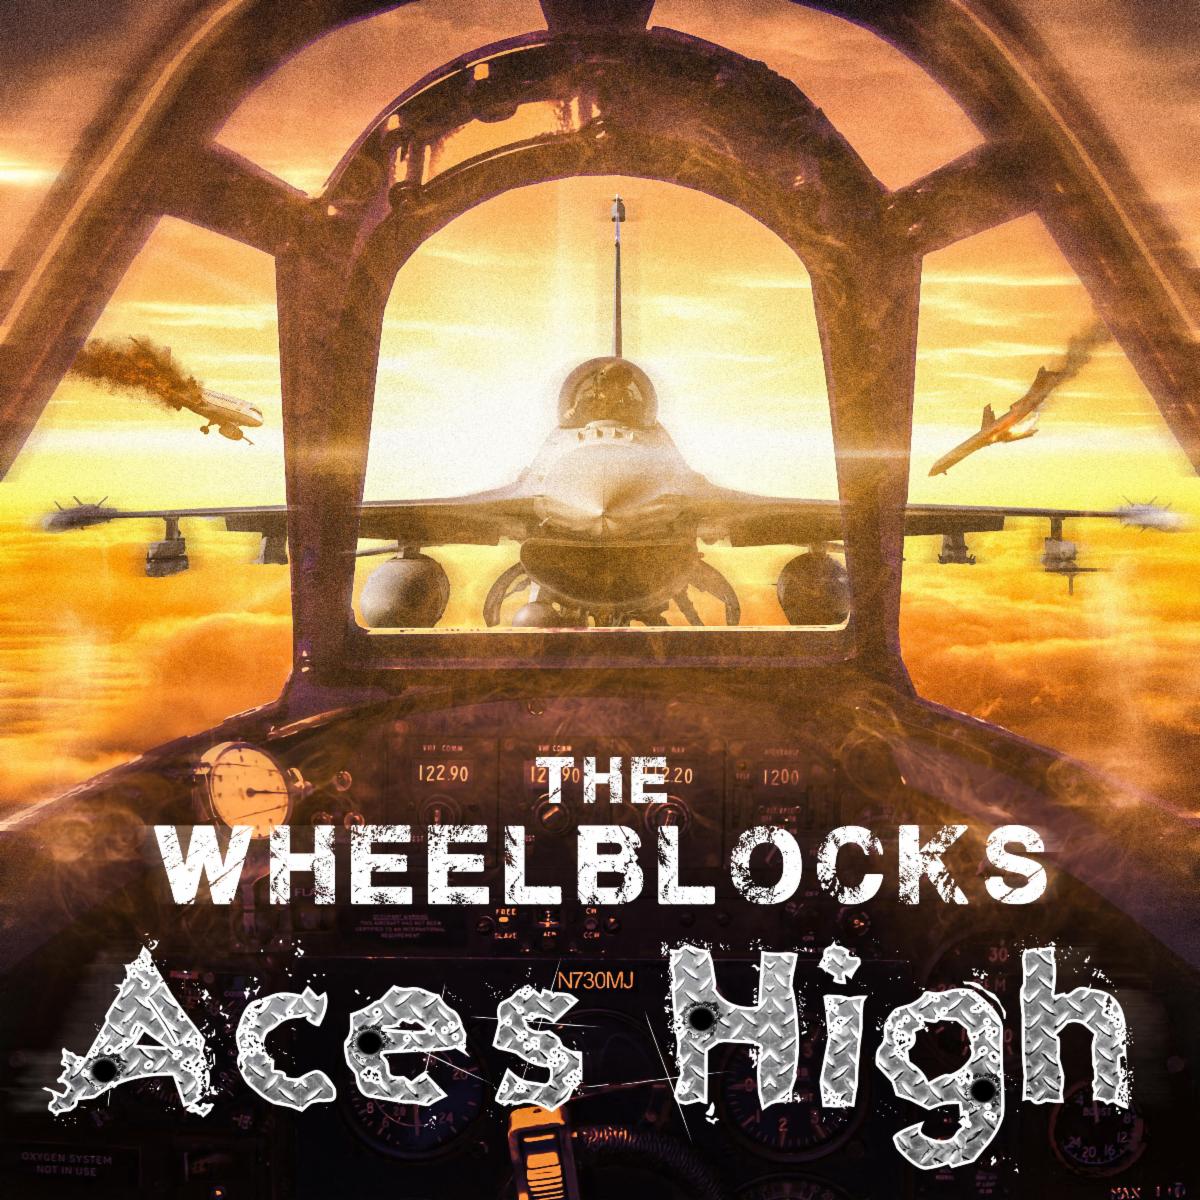 Supergroup The Wheelblocks (Feat. Members of Fozzy, Avenged Sevenfold, Alice Cooper, Ex-Machinehead) Release Cover of Iron Maiden's "Aces High"